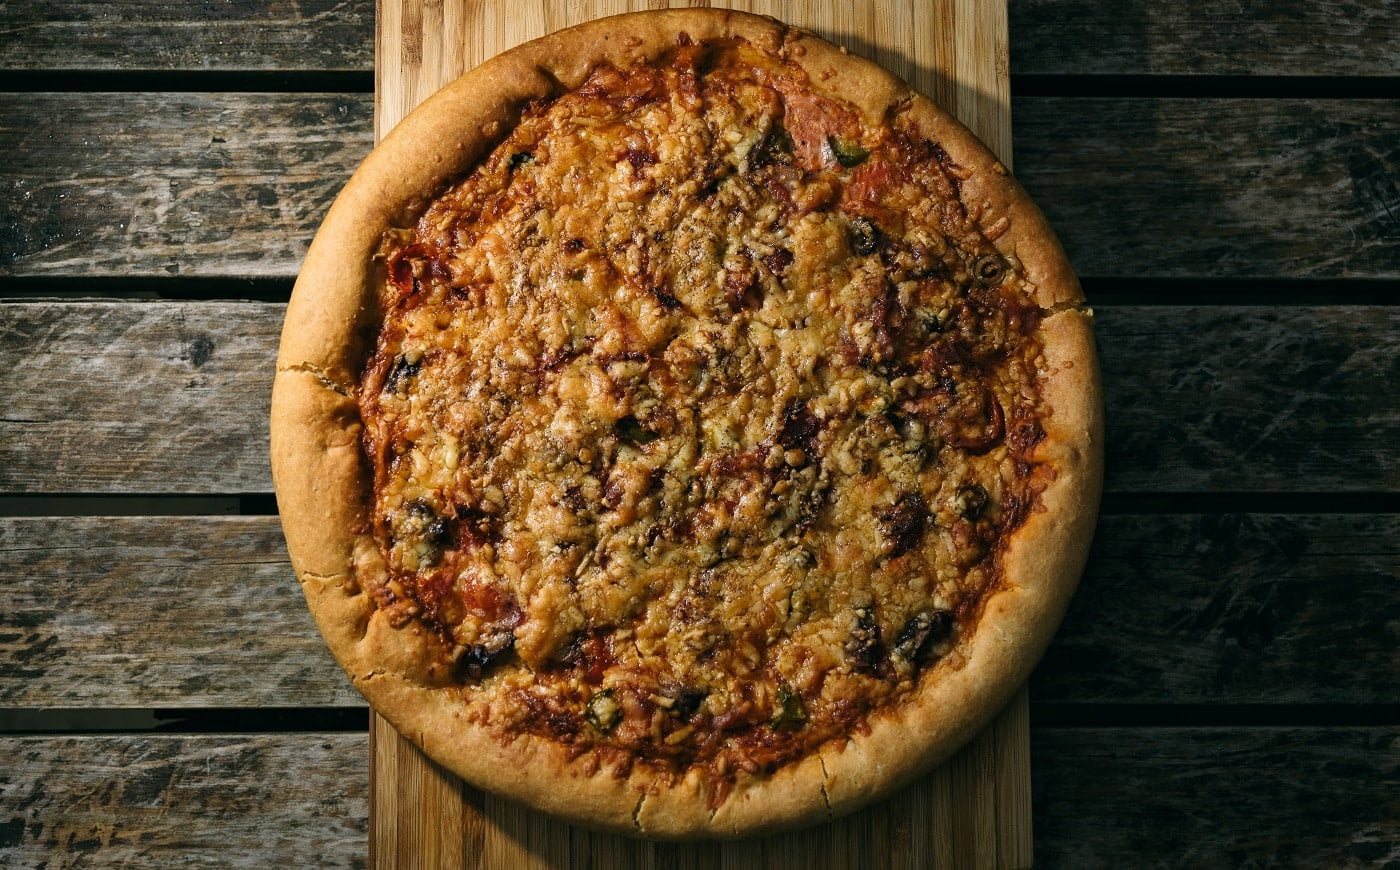 A high angle shot of a freshly baked pizza on a wooden surface